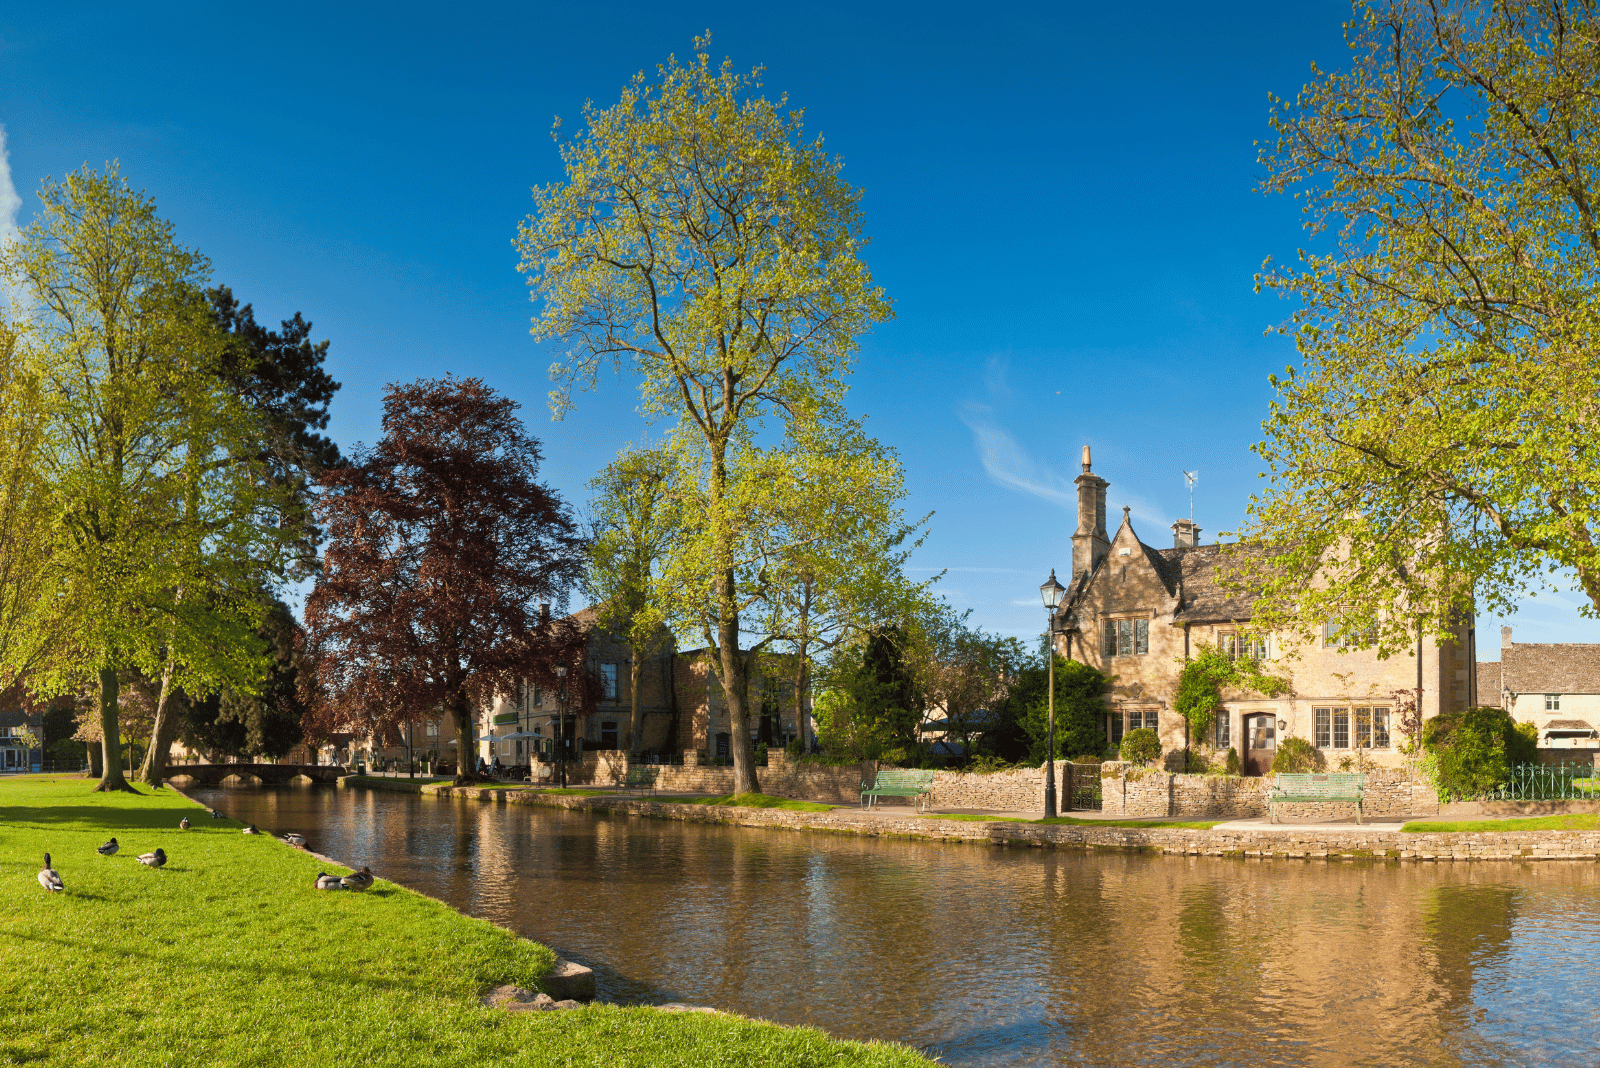 Bourton on the Water in the Cotswolds